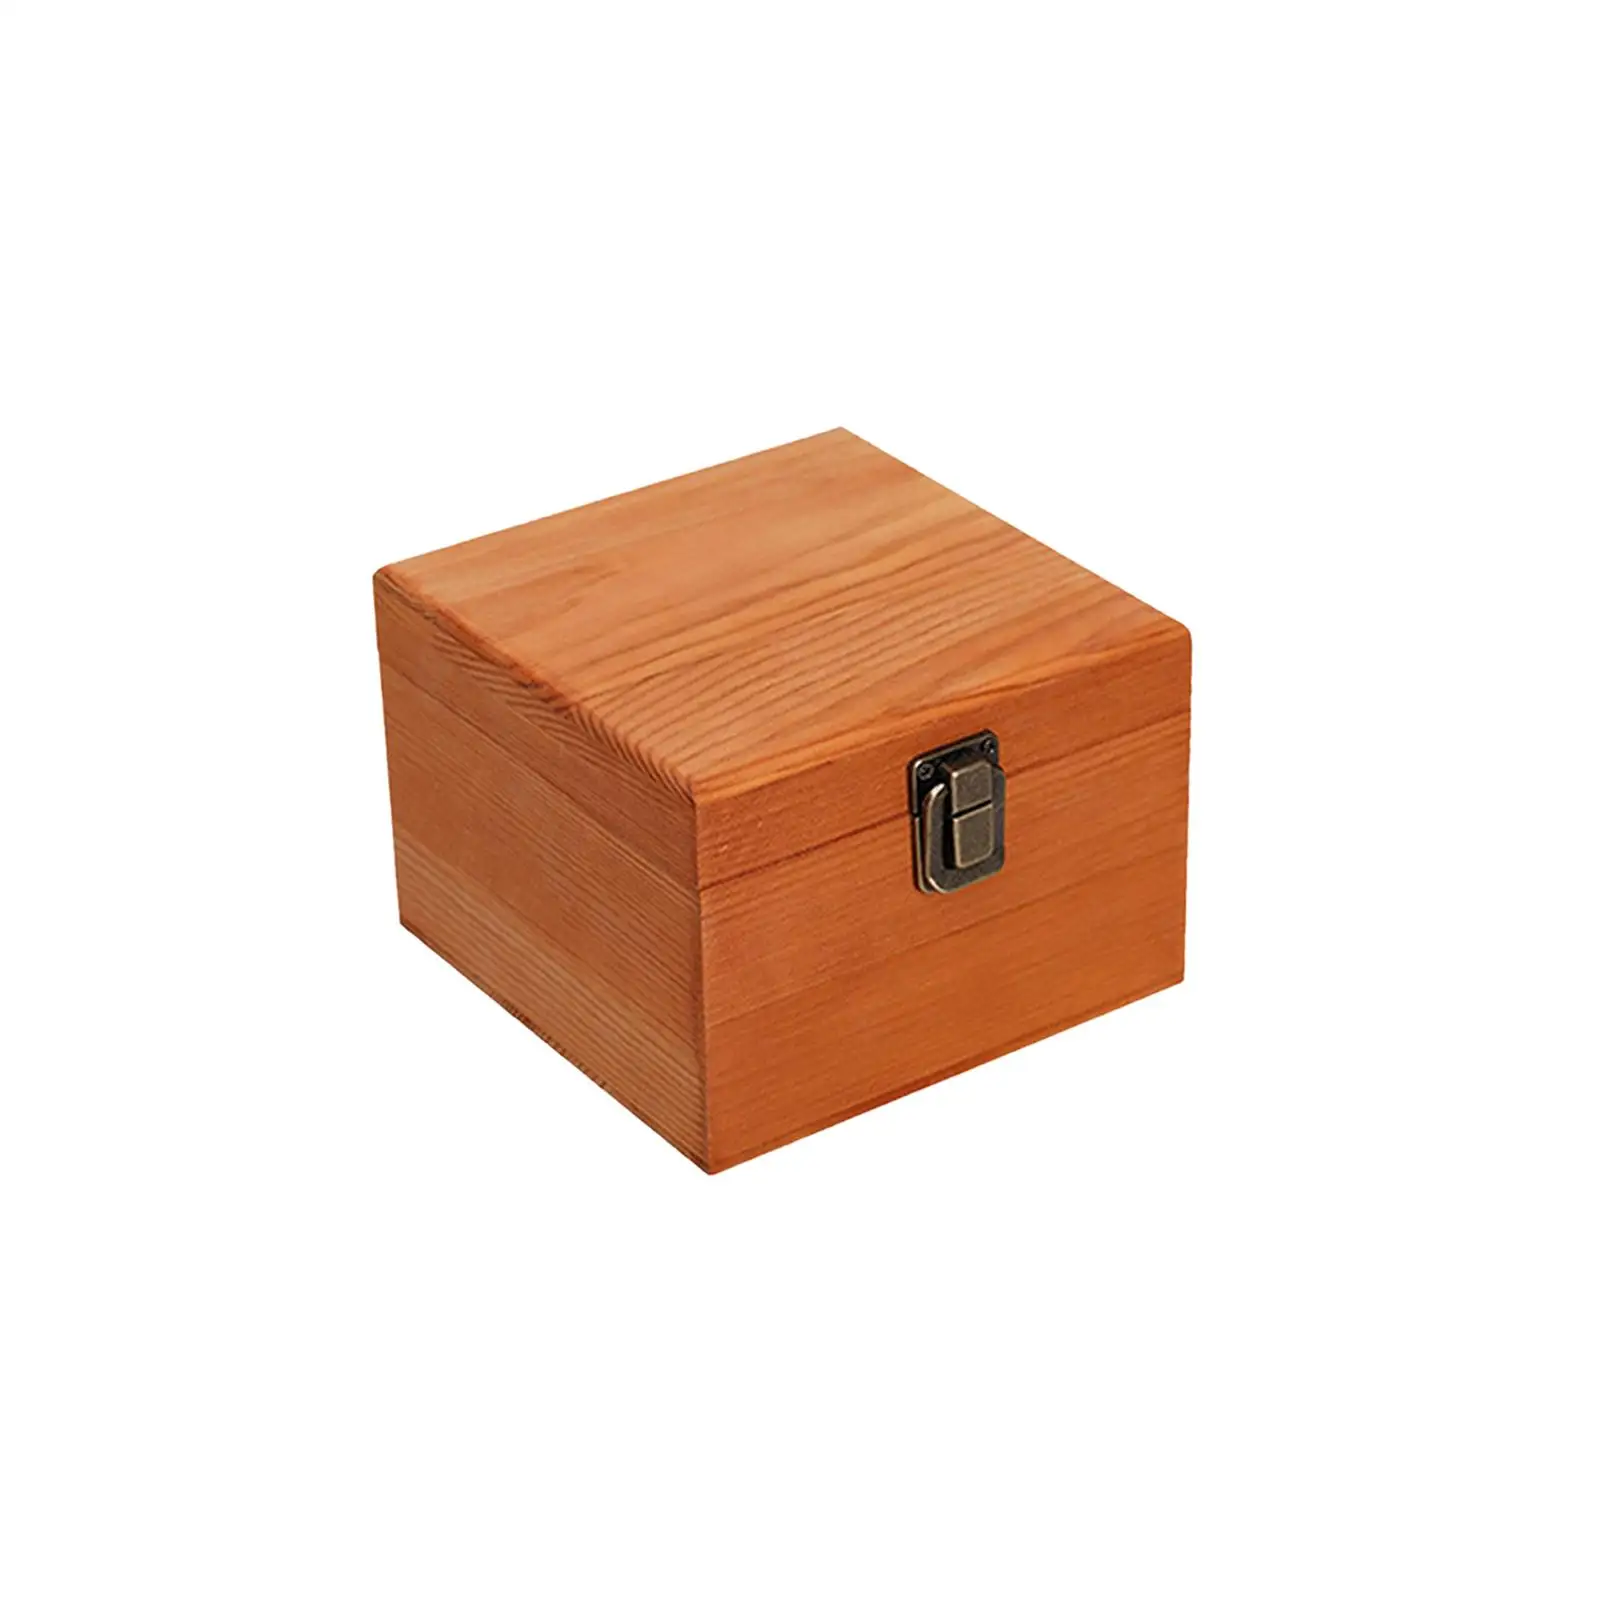 Wooden Keepsake Box with Lid Gift Wooden Storage Box for Home Decorative Boxes